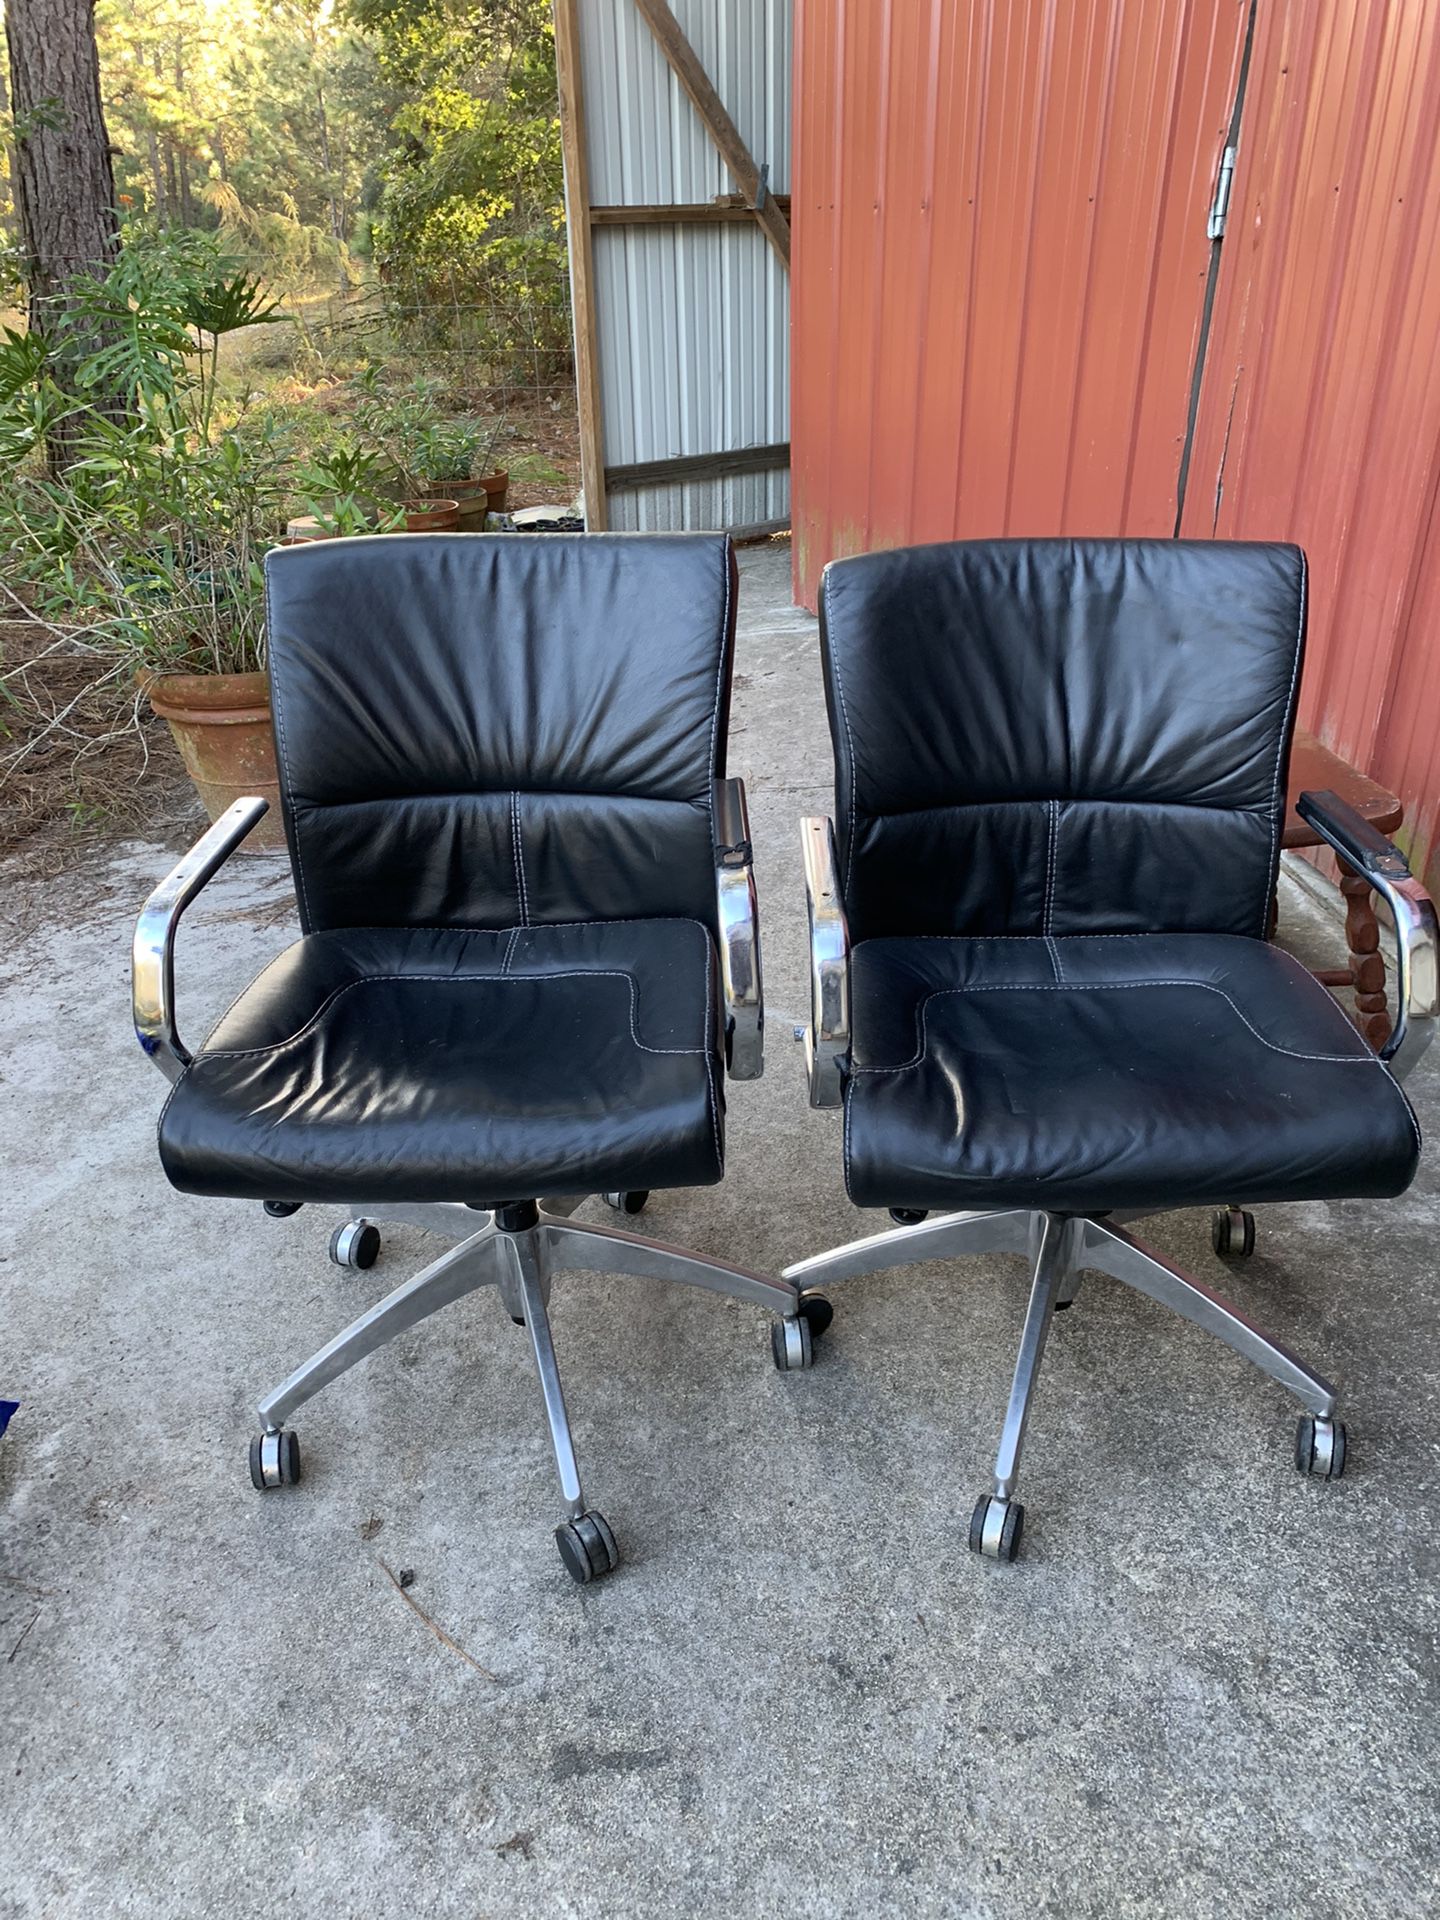 Free Conference Room Chair - 4 Available